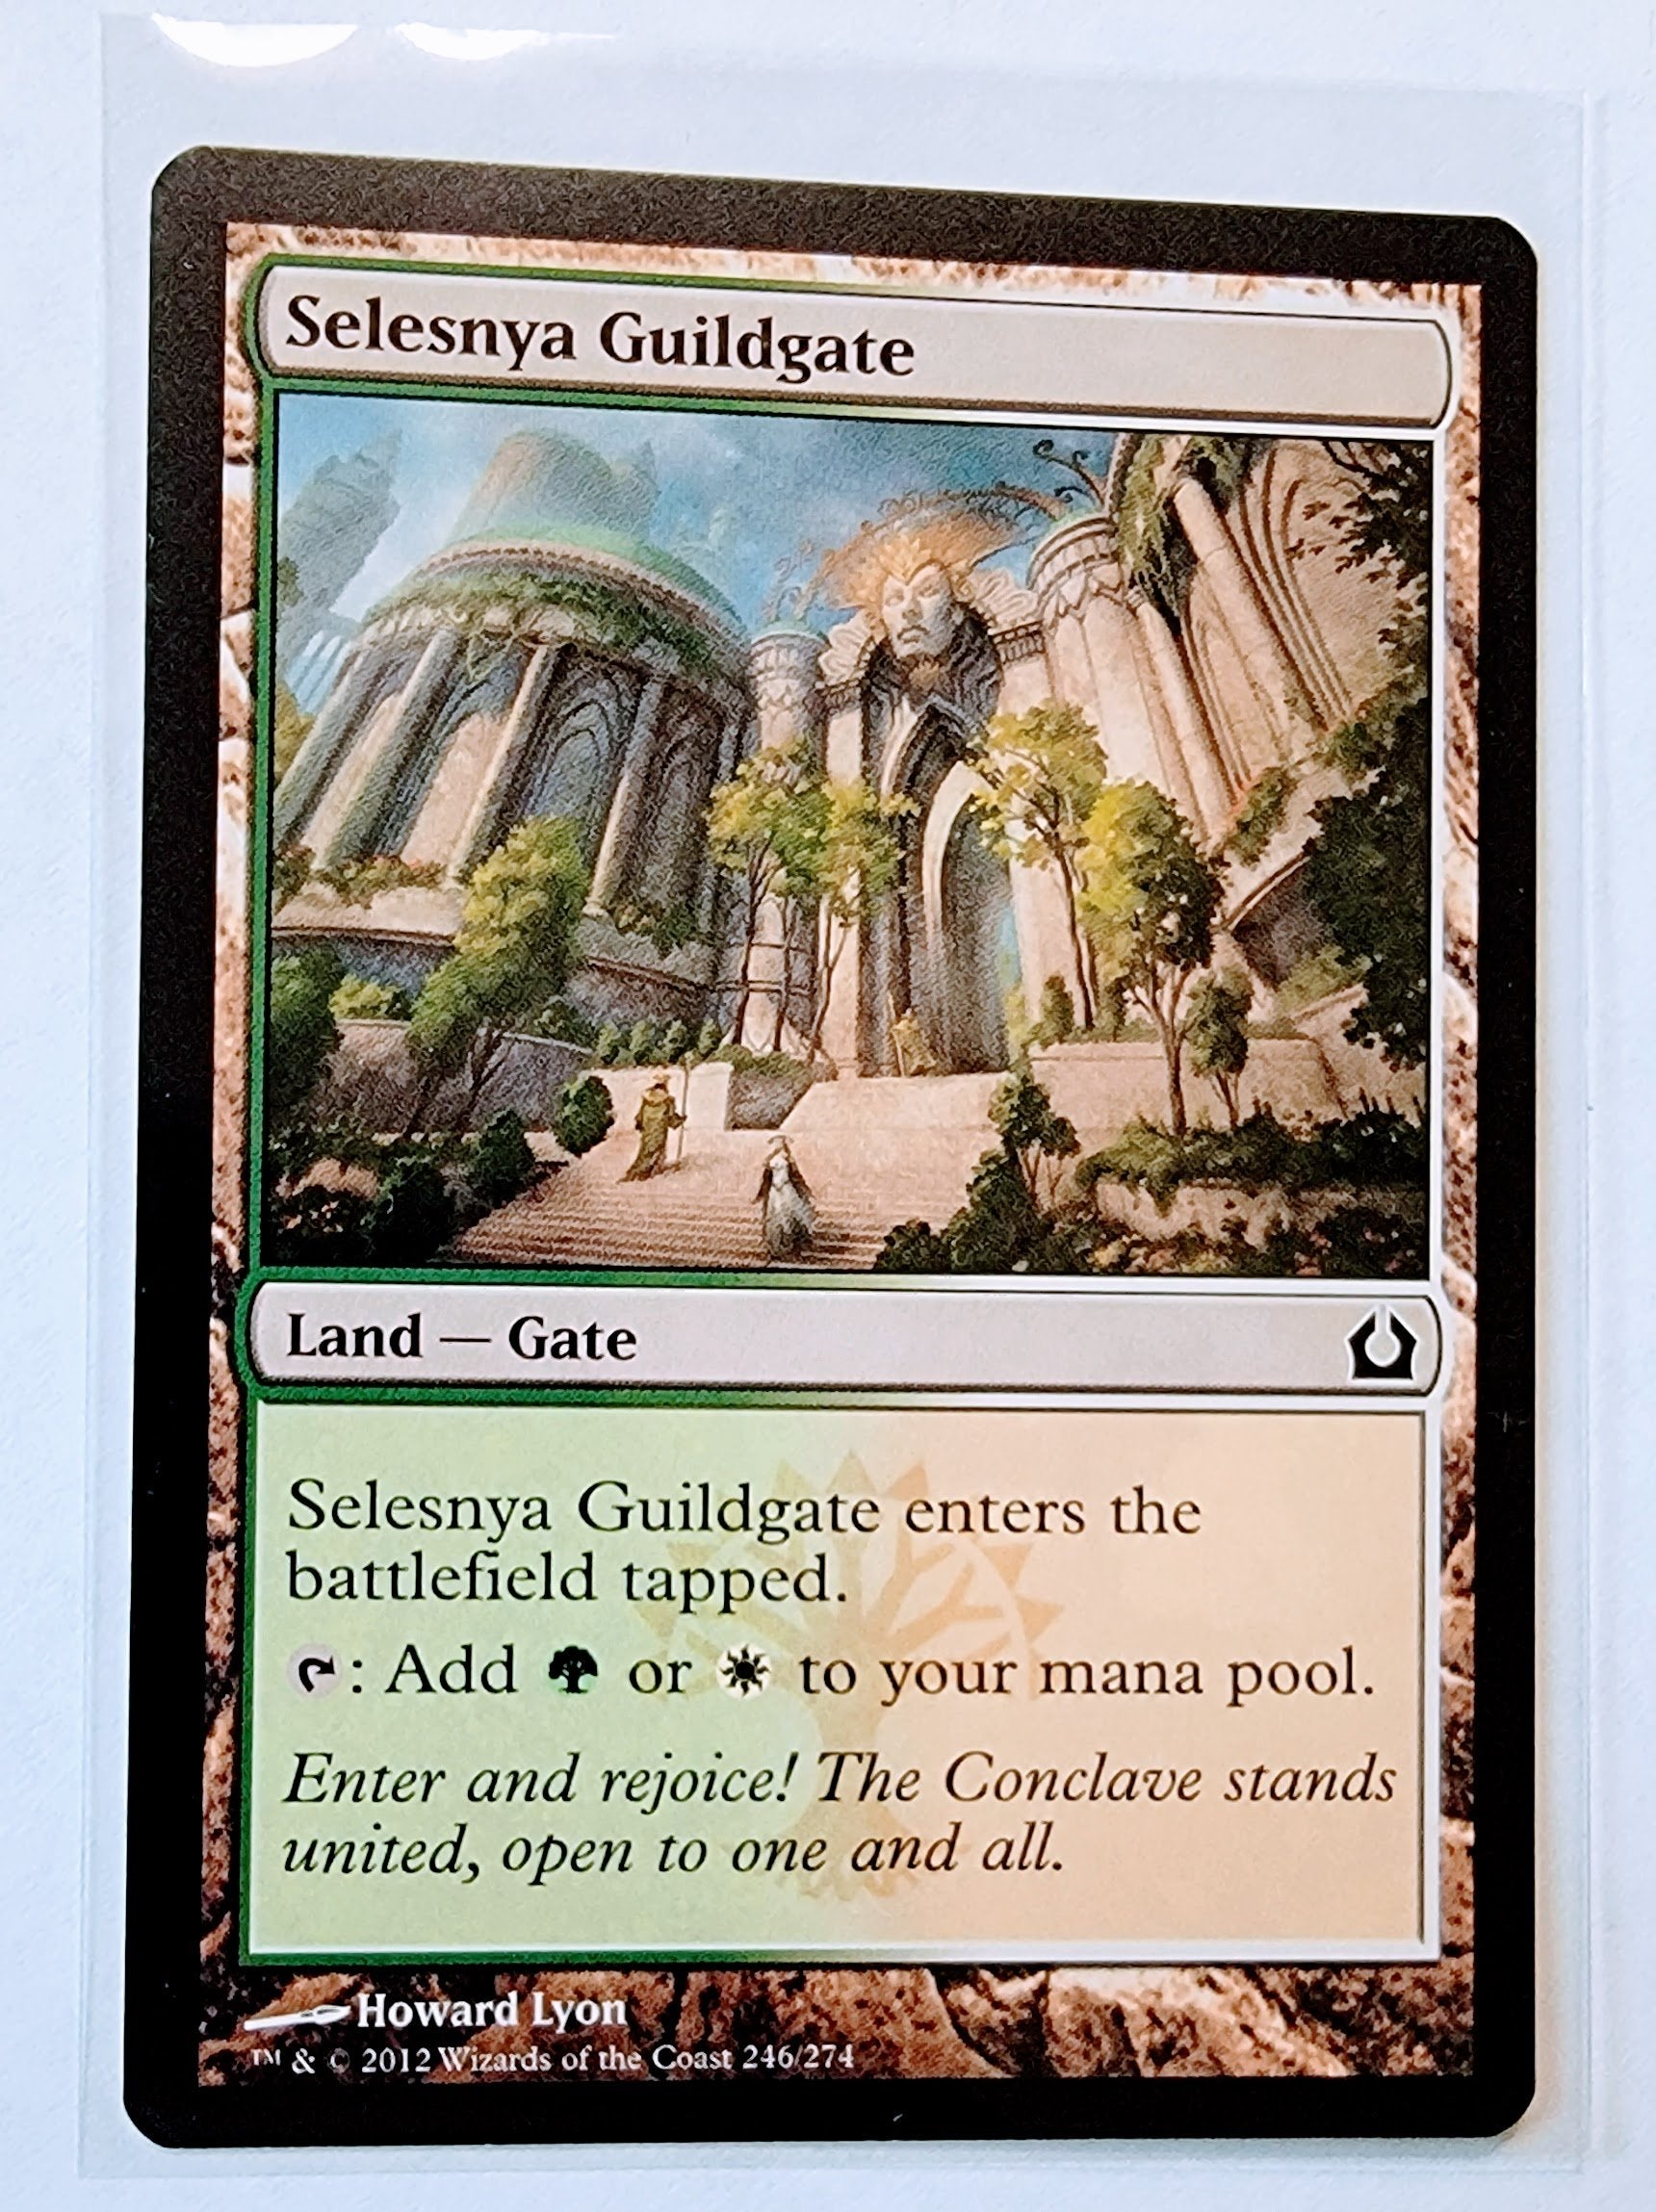 2012 Wizards of the Coast Magic: The Gathering - Selesnya Guildgate Booster Card MCSC1 simple Xclusive Collectibles   